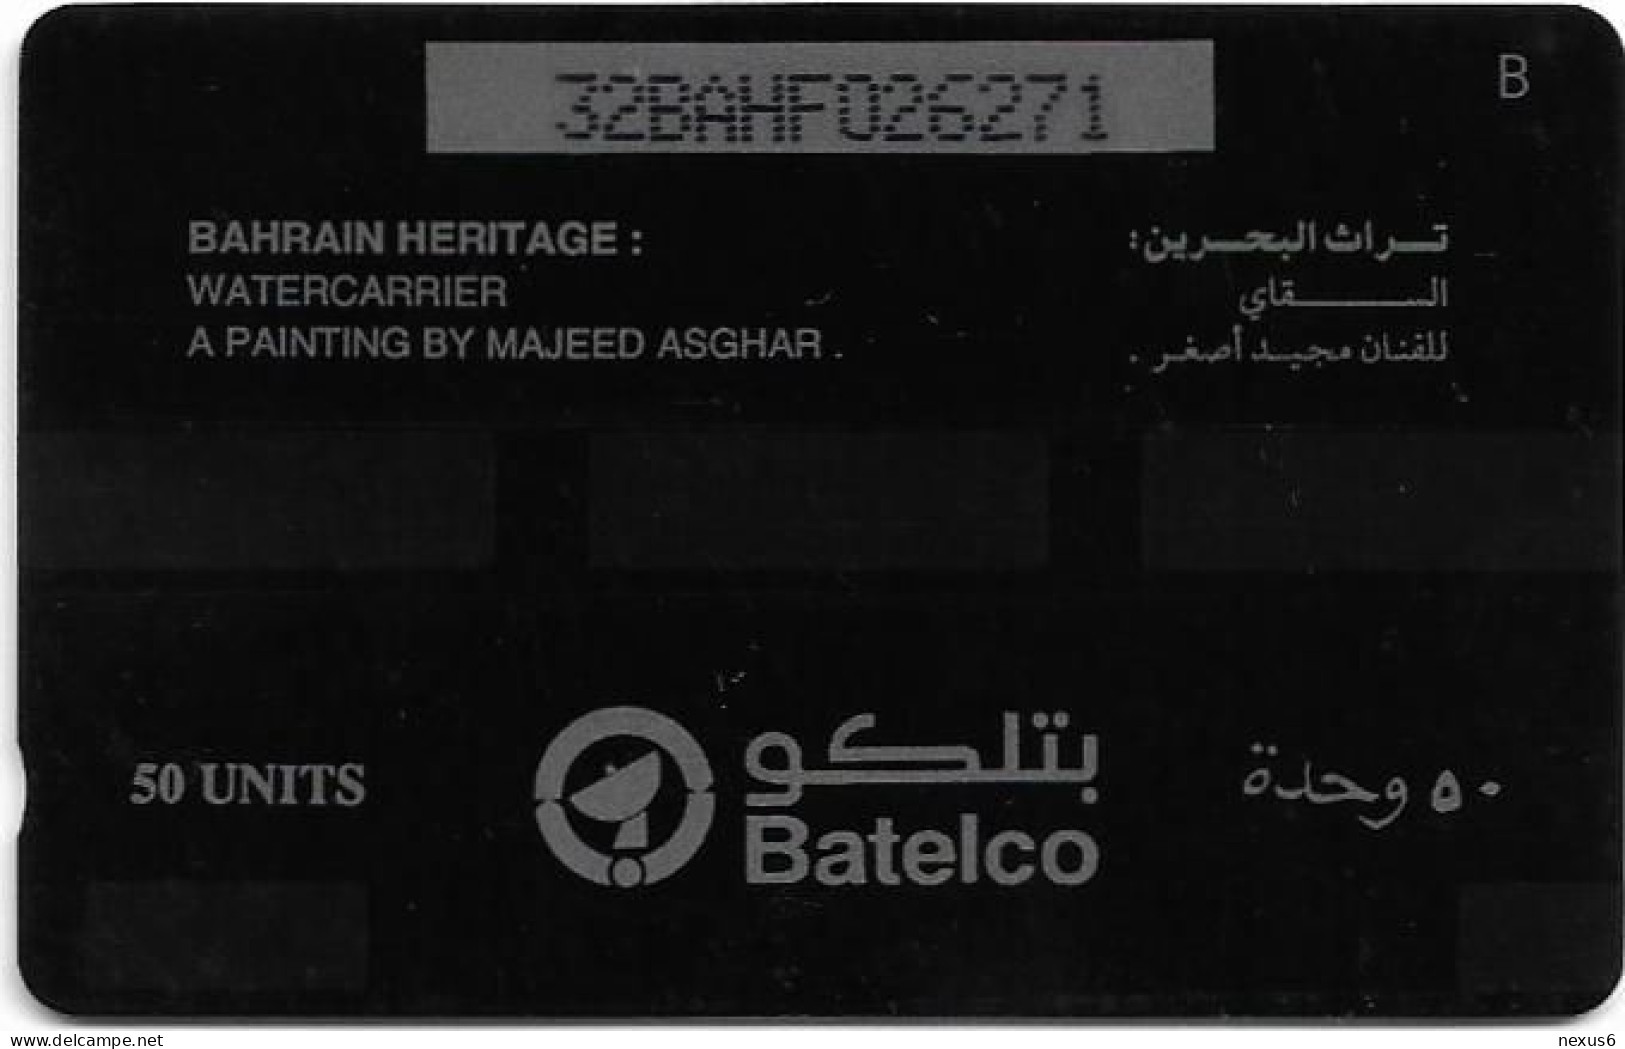 Bahrain - Batelco (GPT) - Heritage - Water Carrier - 32BAHF (Normal 0, Letter ''B''), 1994, 50Units, Used - Bahrein